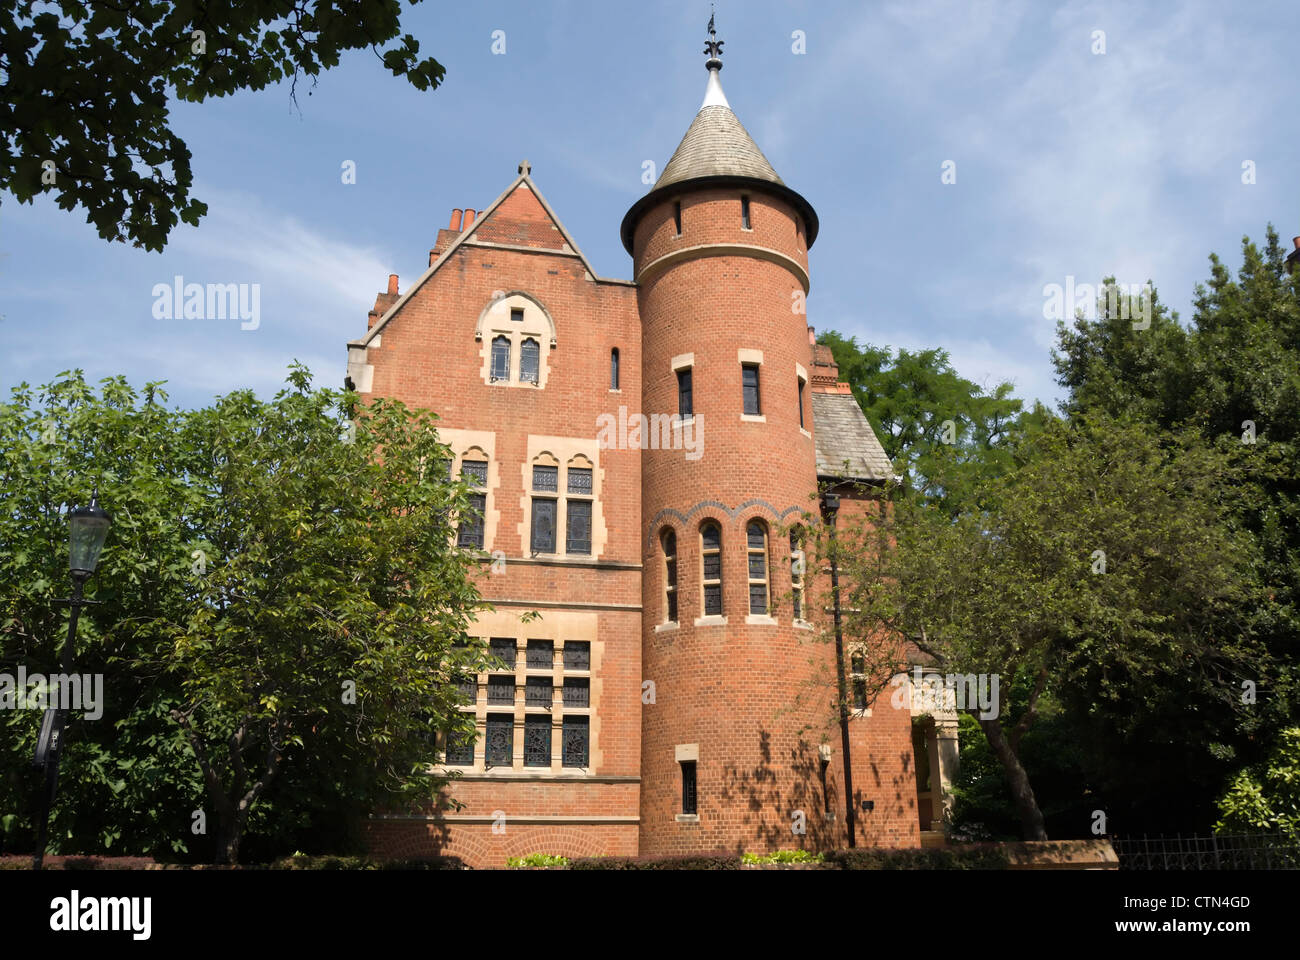 the 1870s tower house, designed by william burges for himself, kensington, london, england Stock Photo